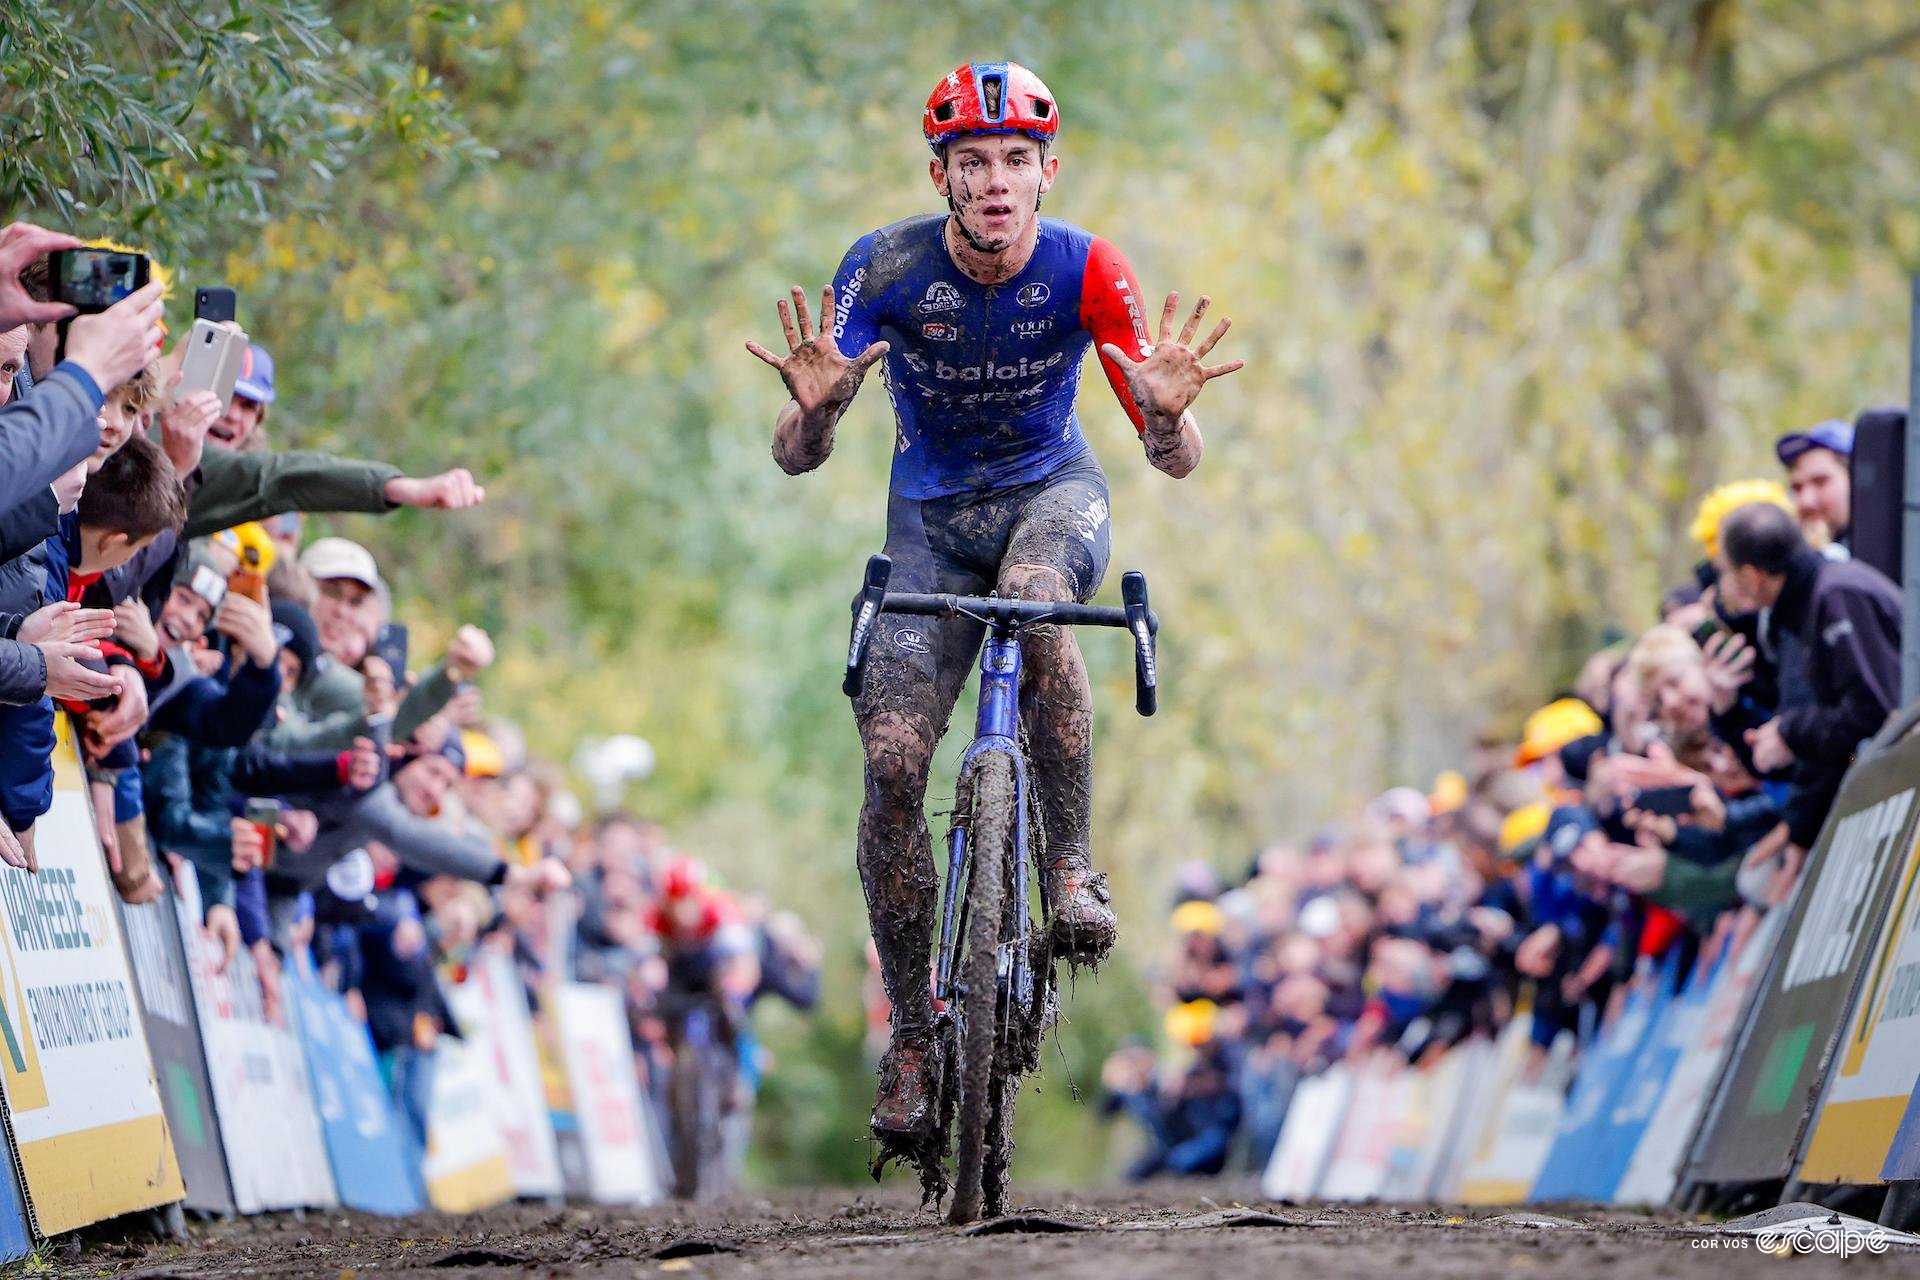 Thibau Nys celebrates Koppenbergcross victory with ten fingers held up to denote the ten wins he and his father share at the race.